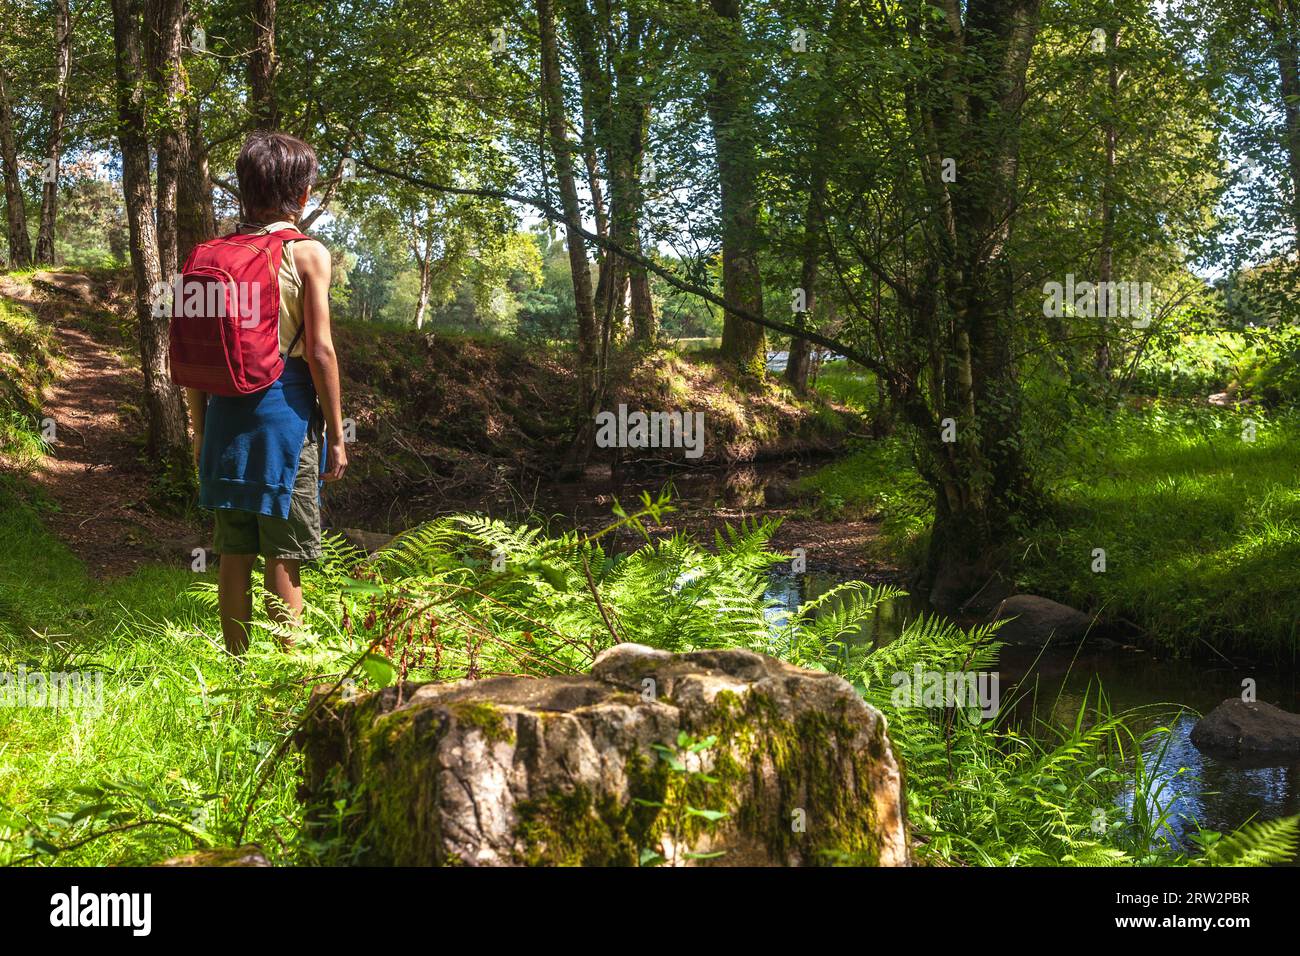 Boy with his backpack watching a stream flowing through the middle of a forest. Stock Photo